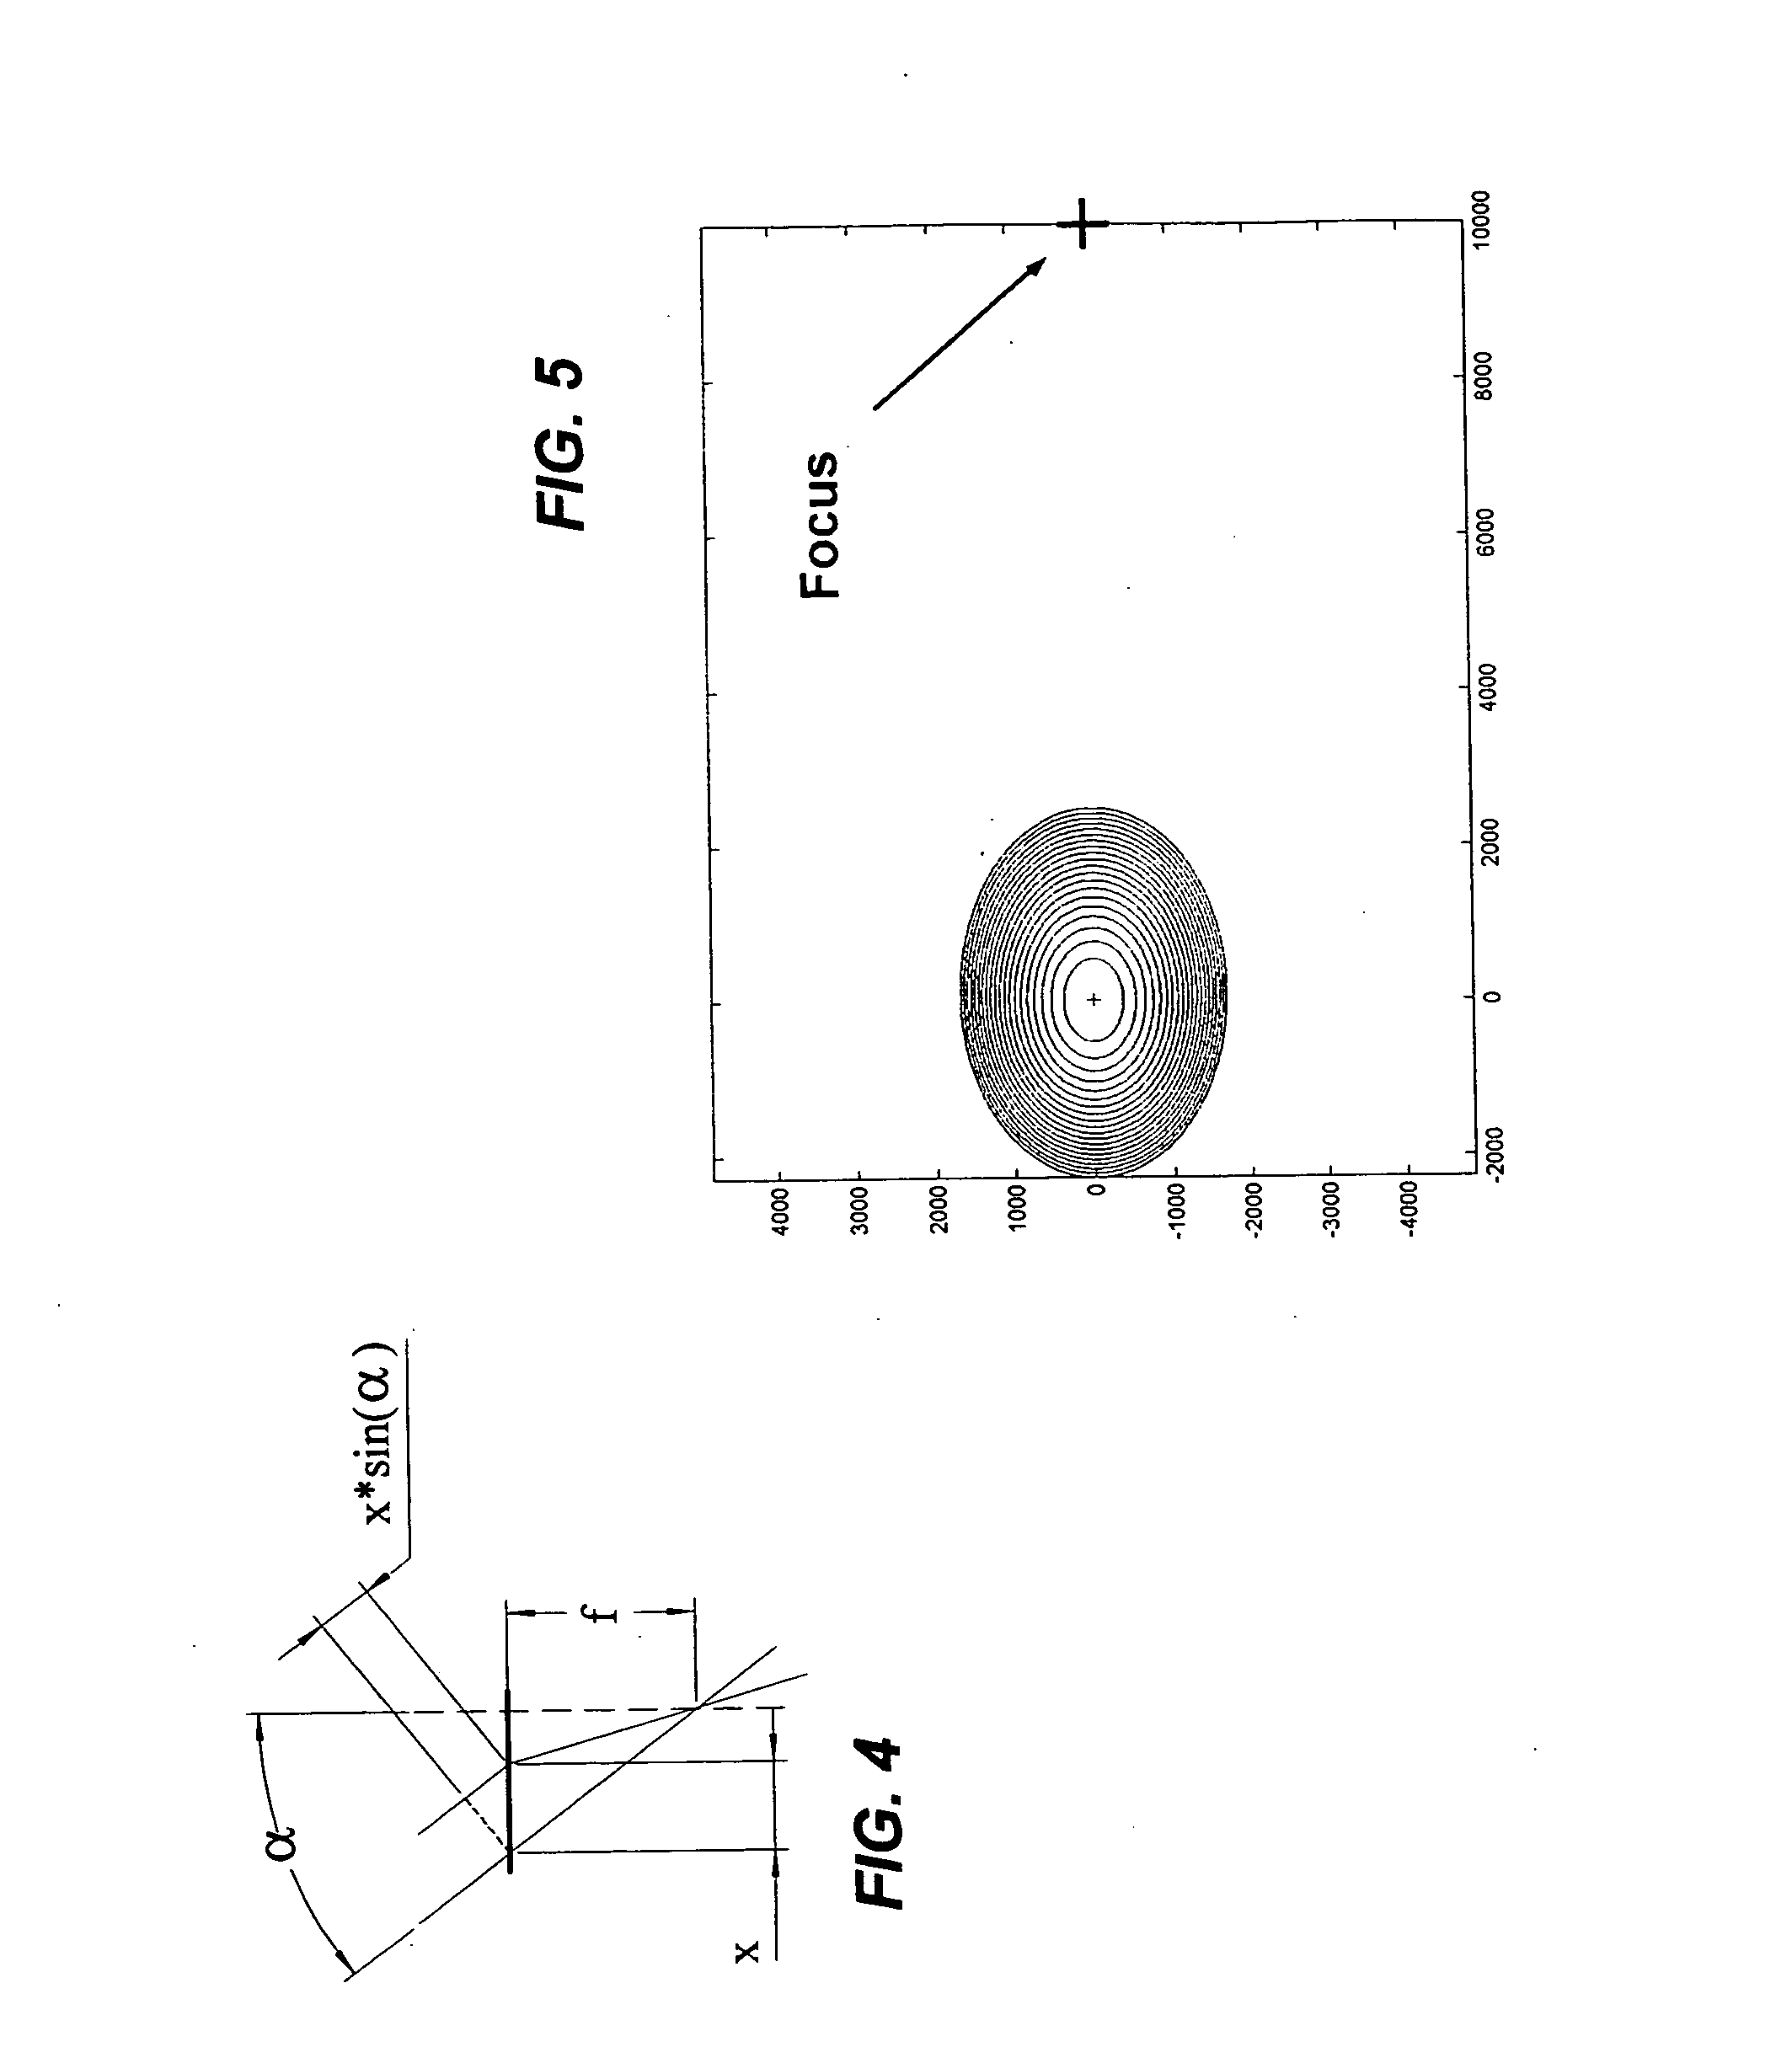 Imaging devices and methods